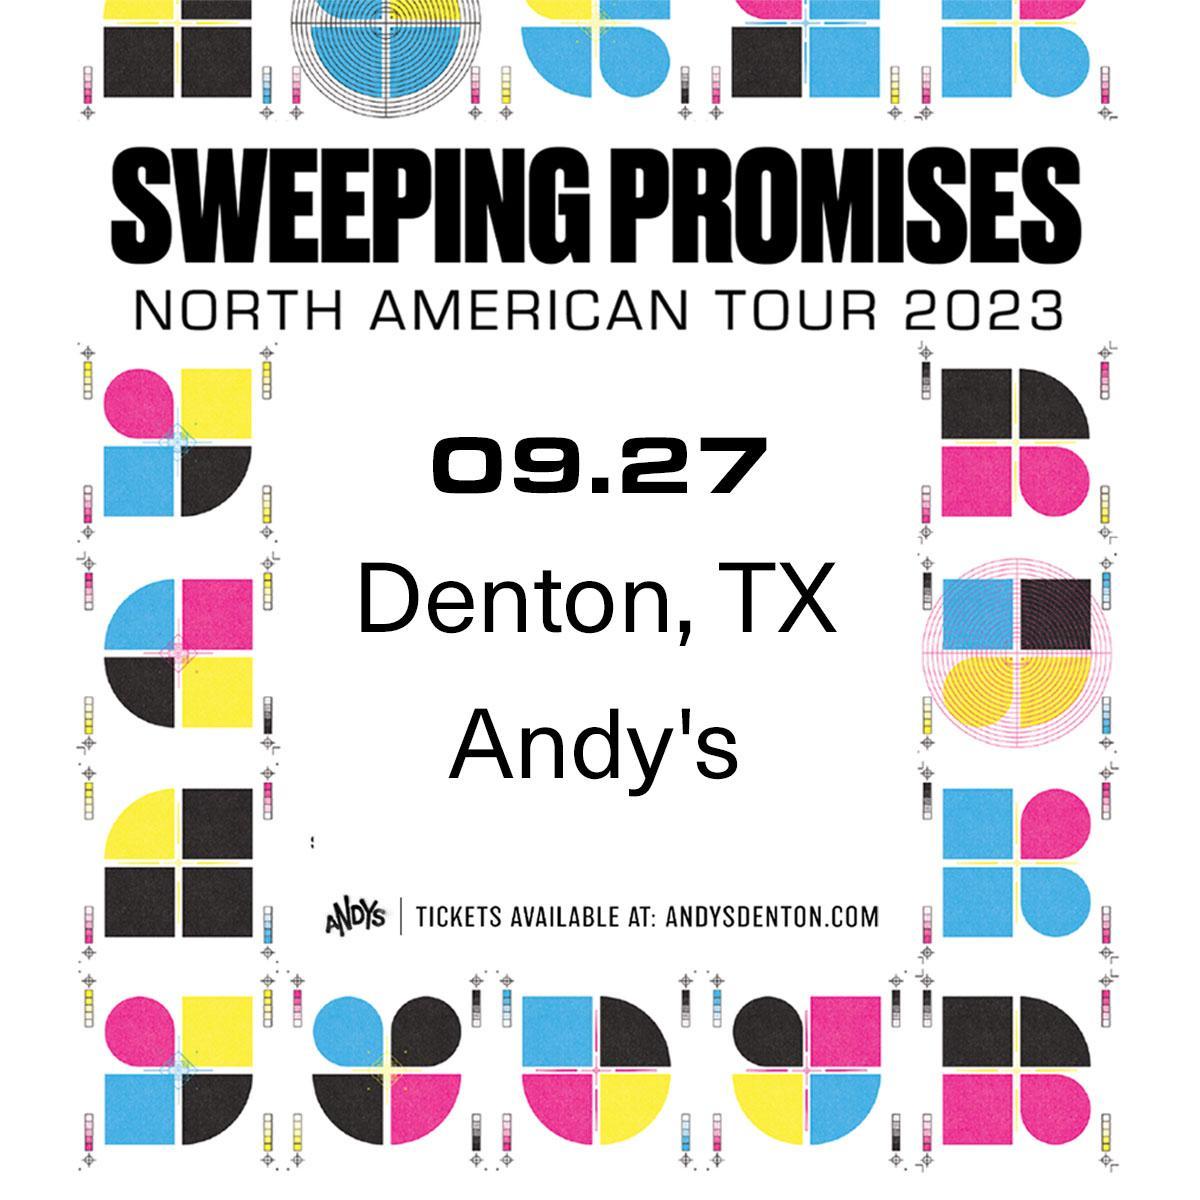 Sweeping Promises | Andys